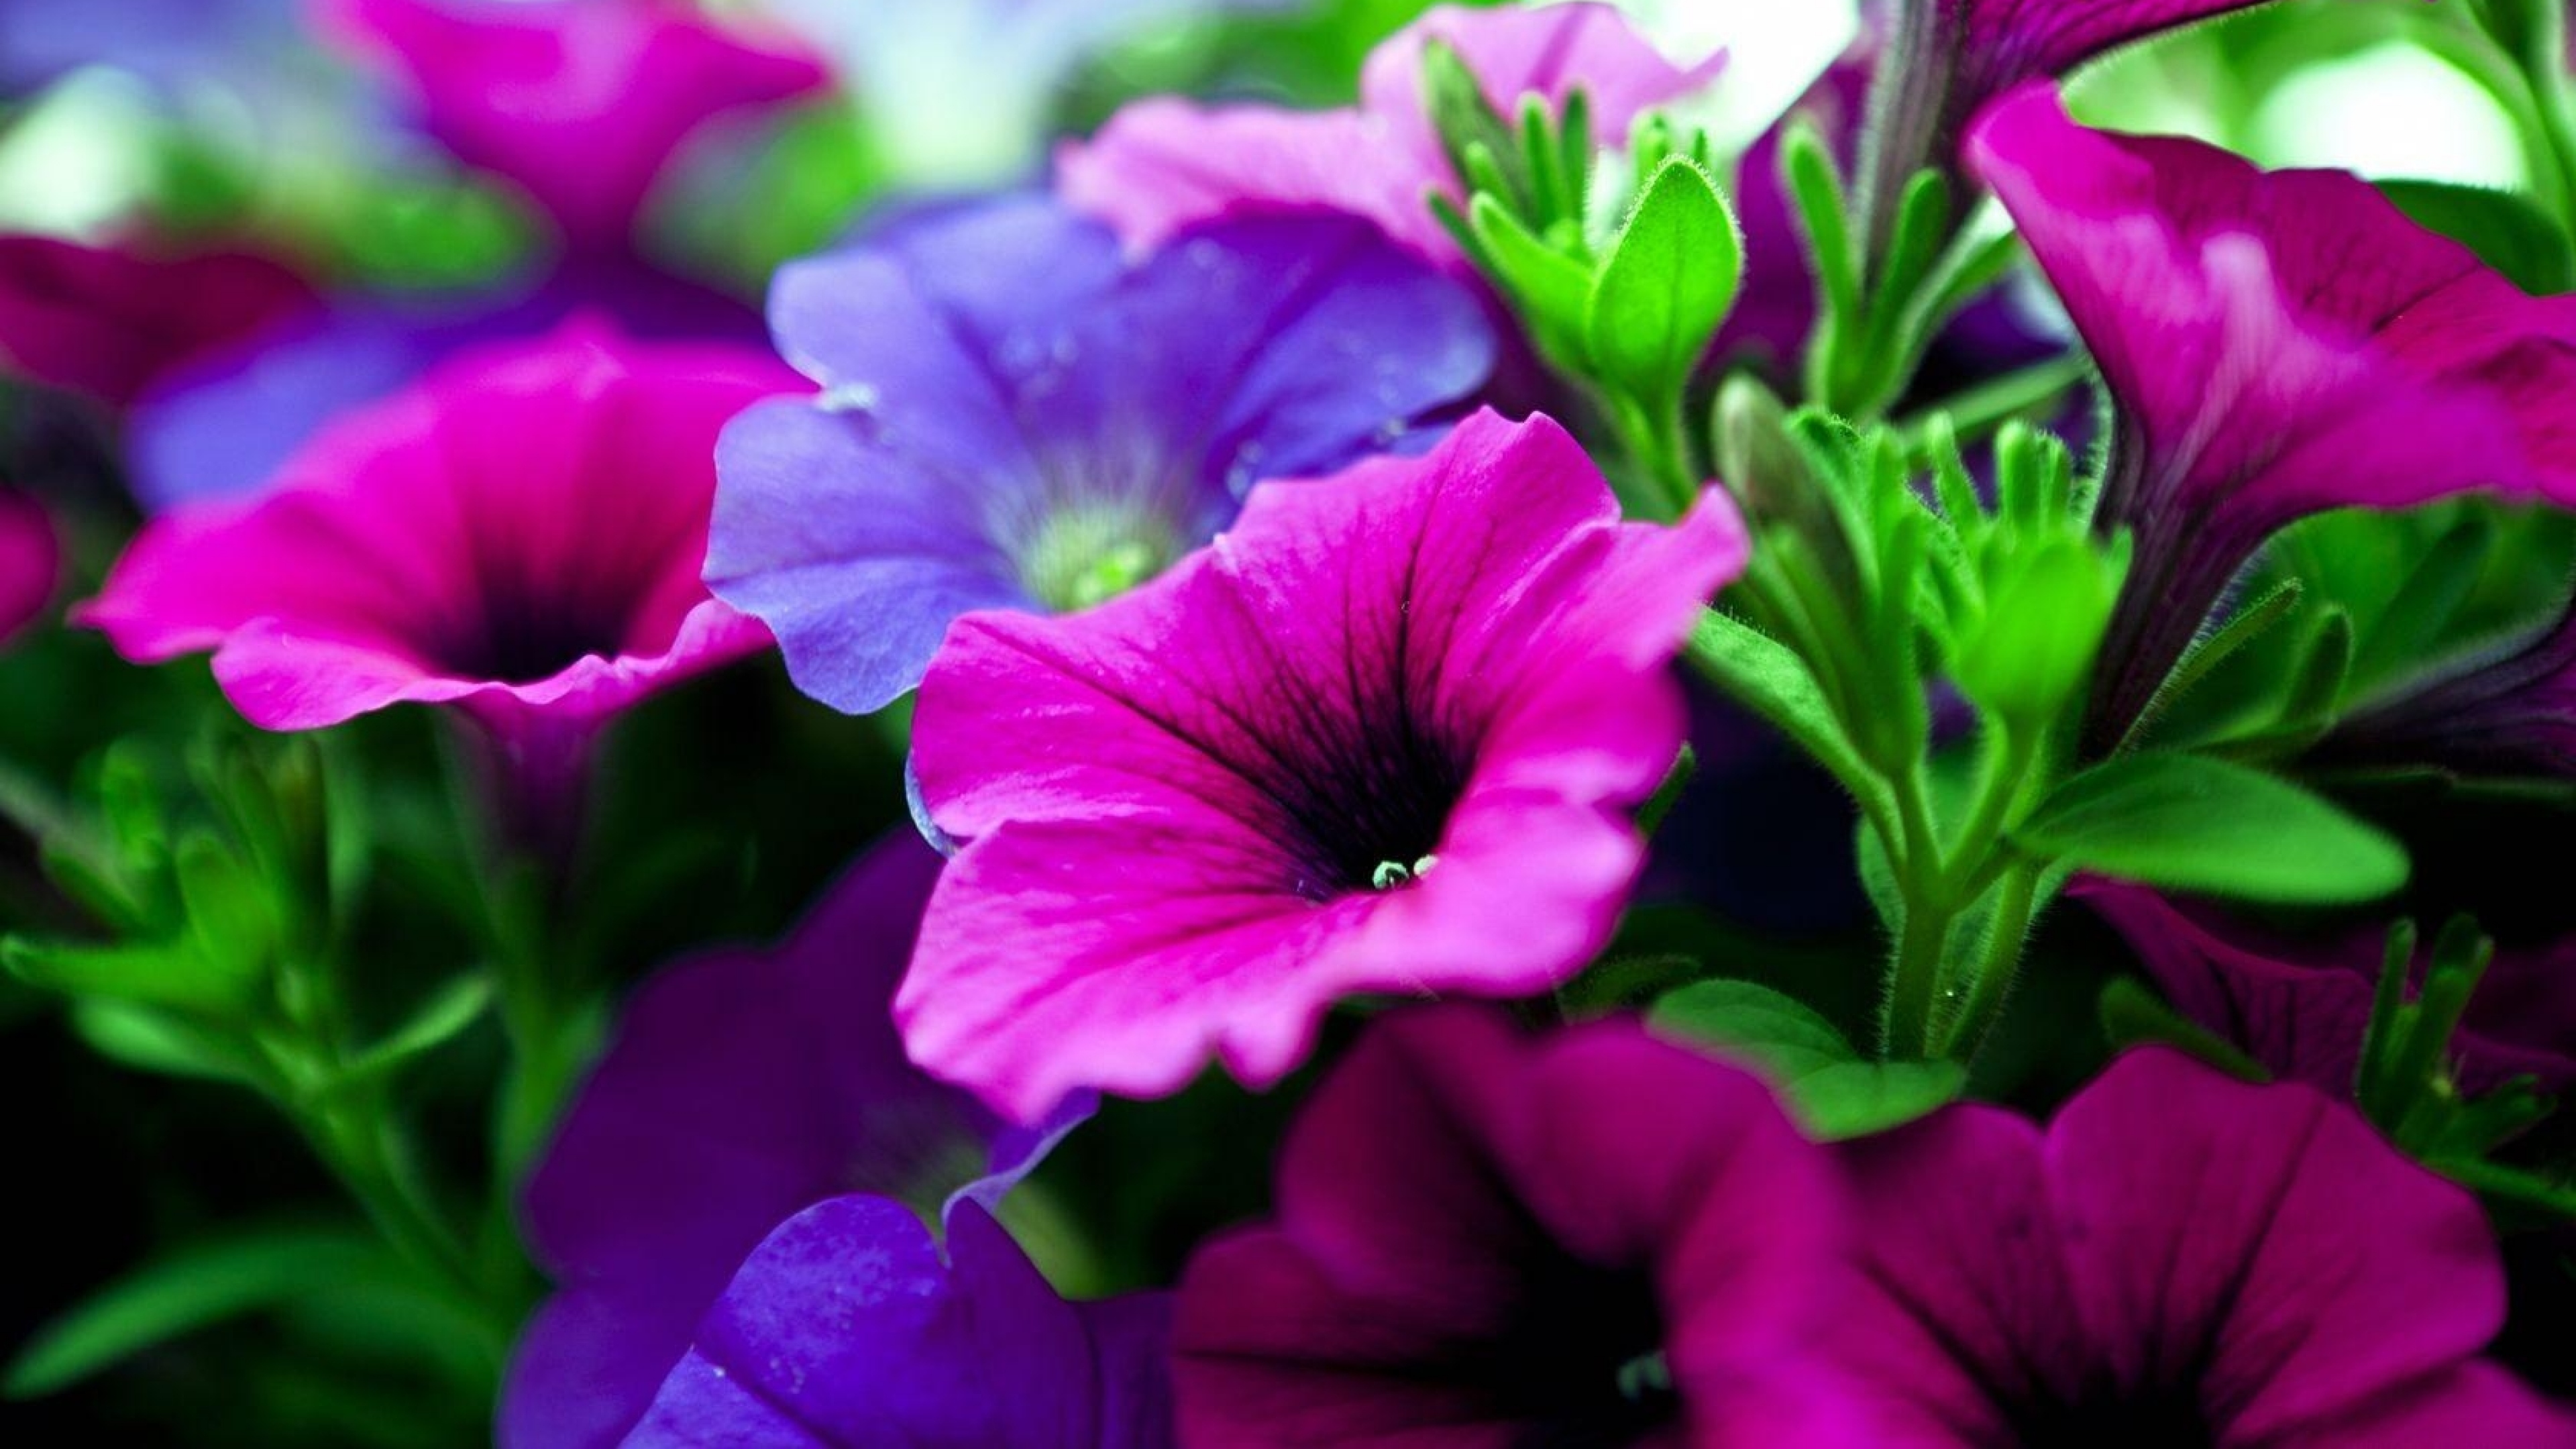 Petunias Flowers Pink And Purple Tree With Green Leaves Close Up